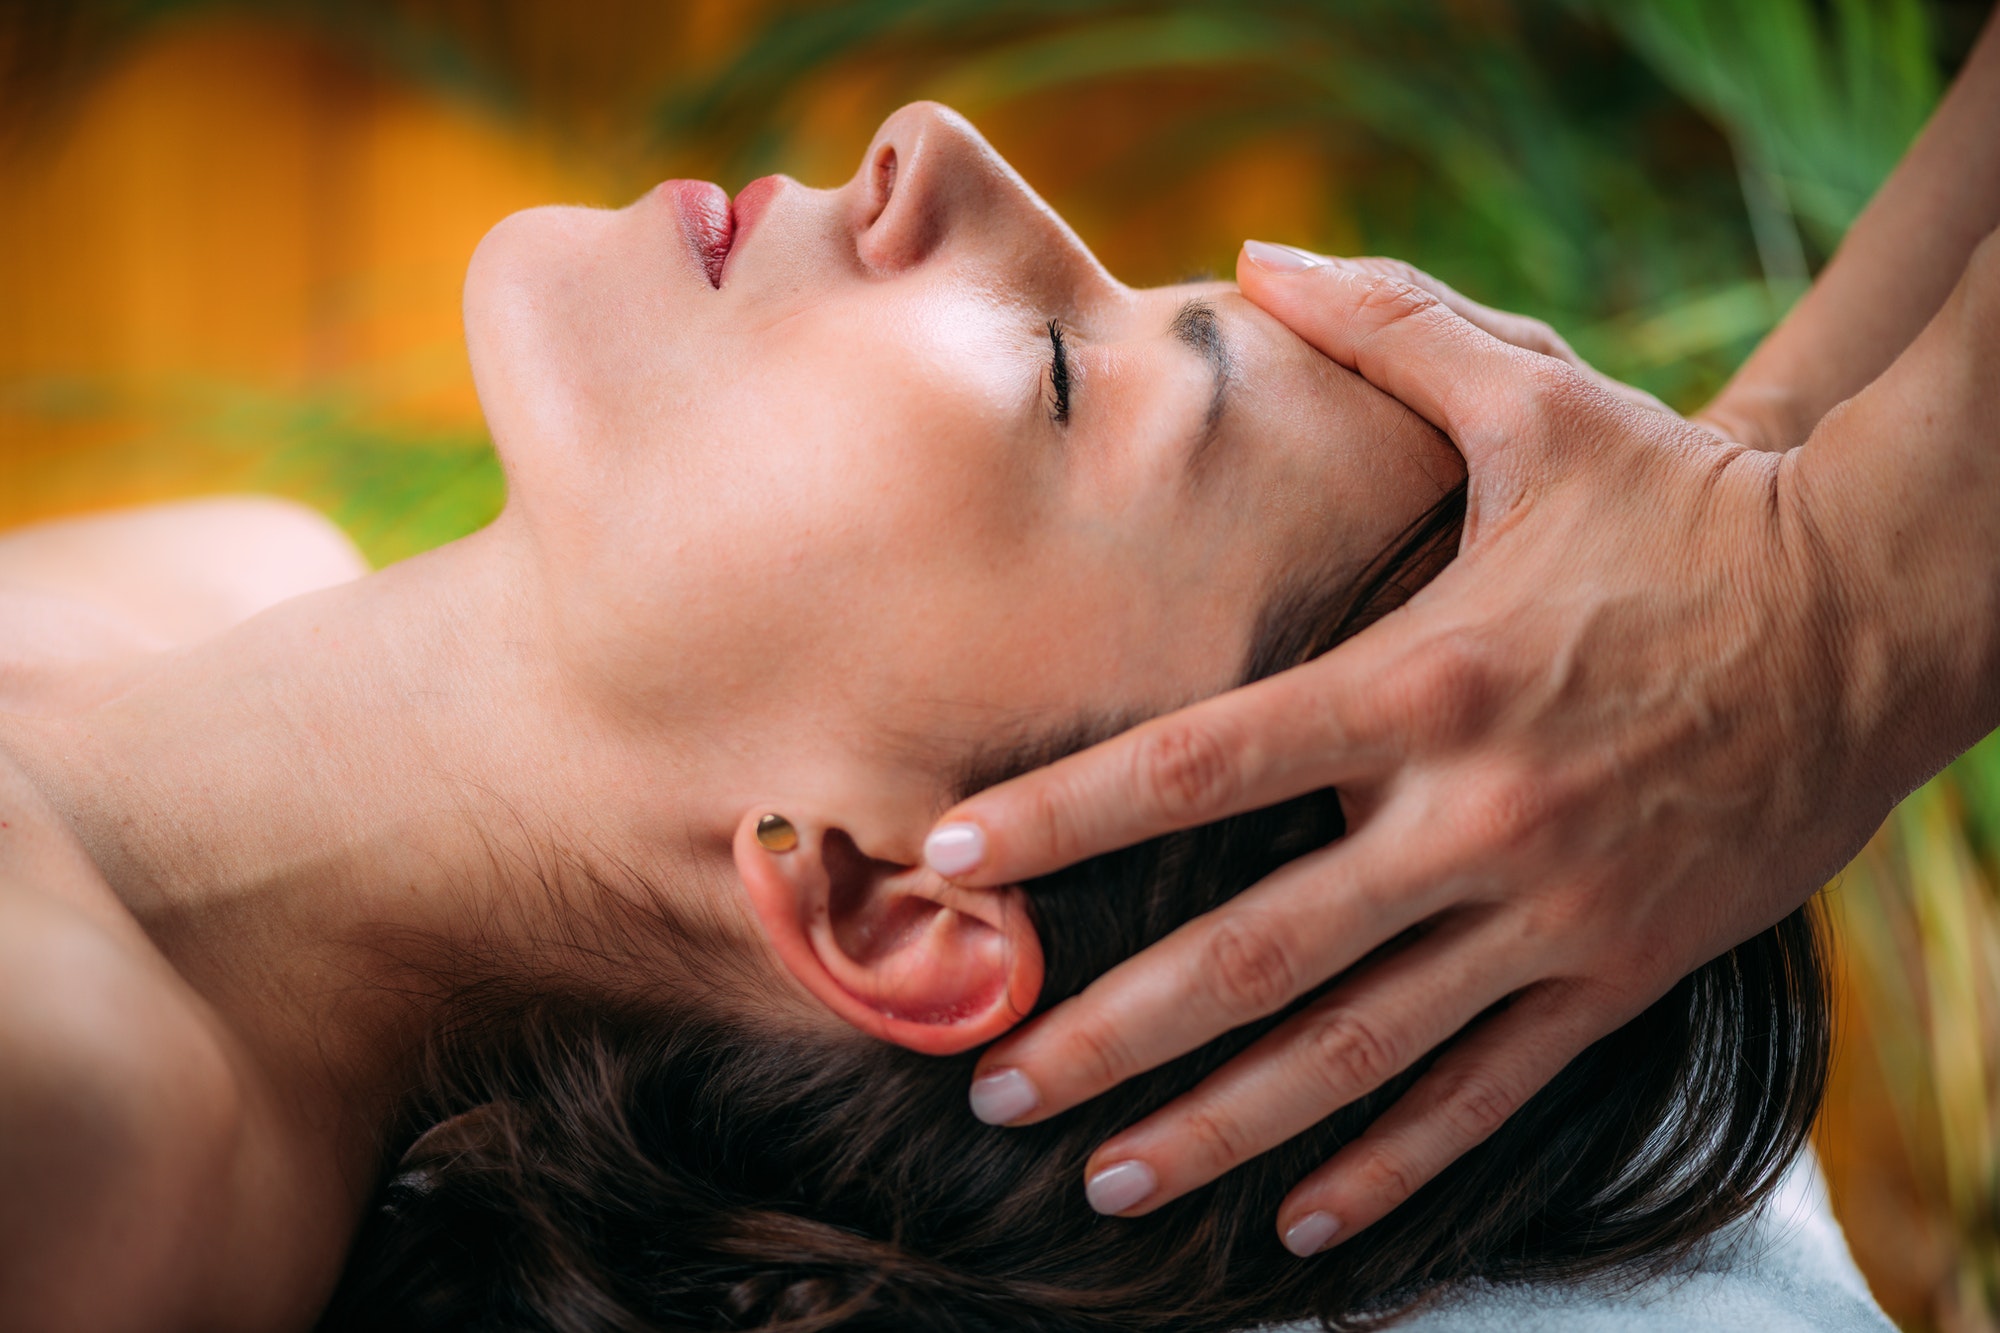 Craniosacral Therapy Head Massage for Pain and Migraine Relief.